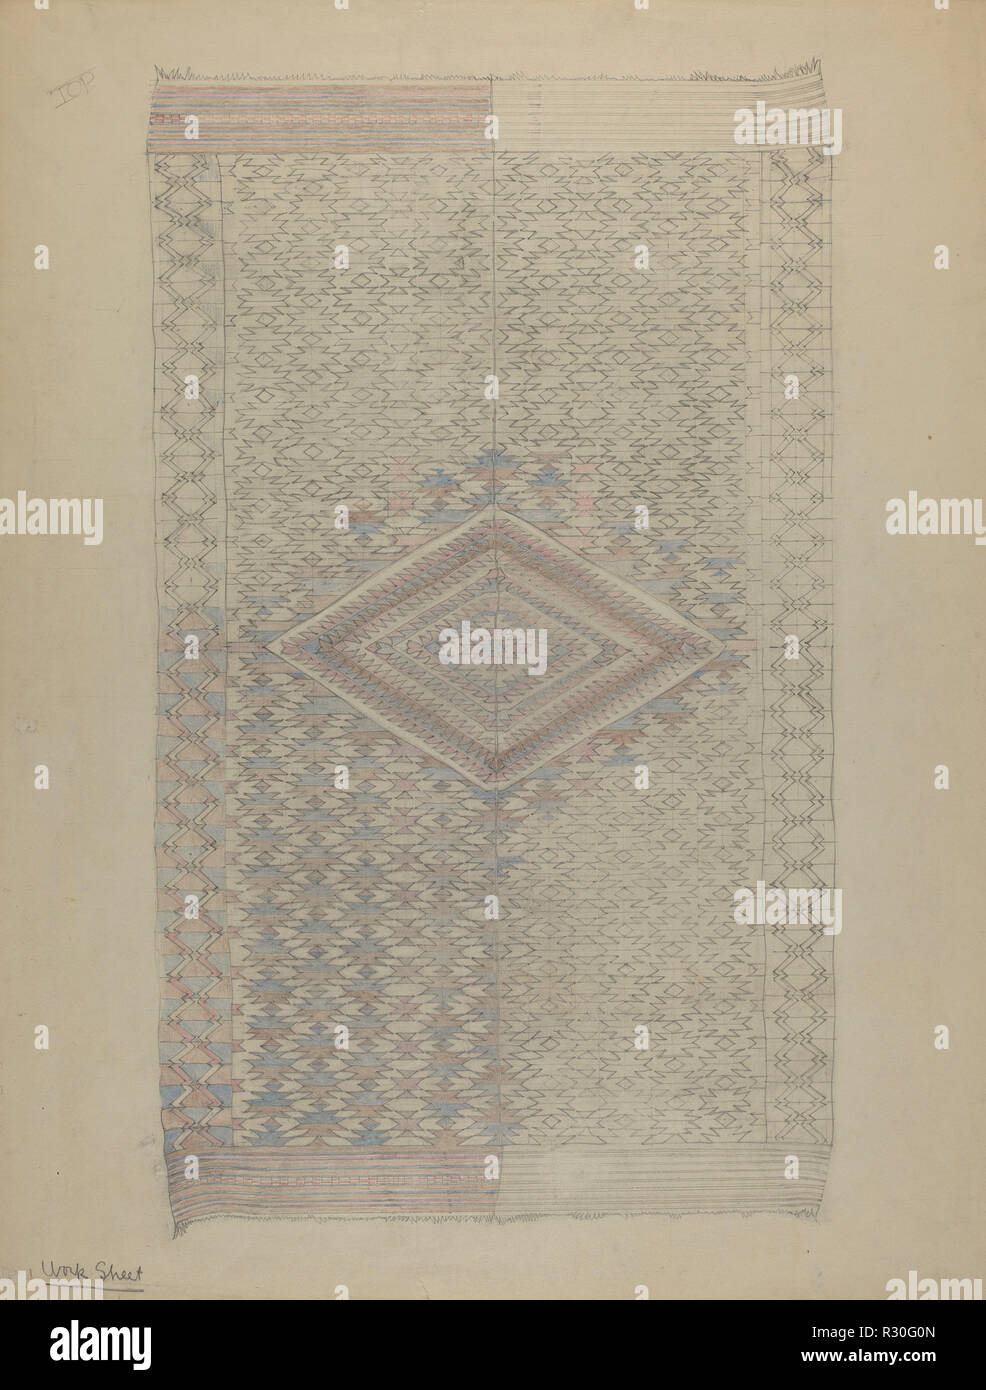 Textile. Dated: 1935/1942. Dimensions: overall: 66.1 x 50.9 cm (26 x 20 1/16 in.). Medium: graphite and colored pencil on paper. Museum: National Gallery of Art, Washington DC. Author: American 20th Century. Stock Photo